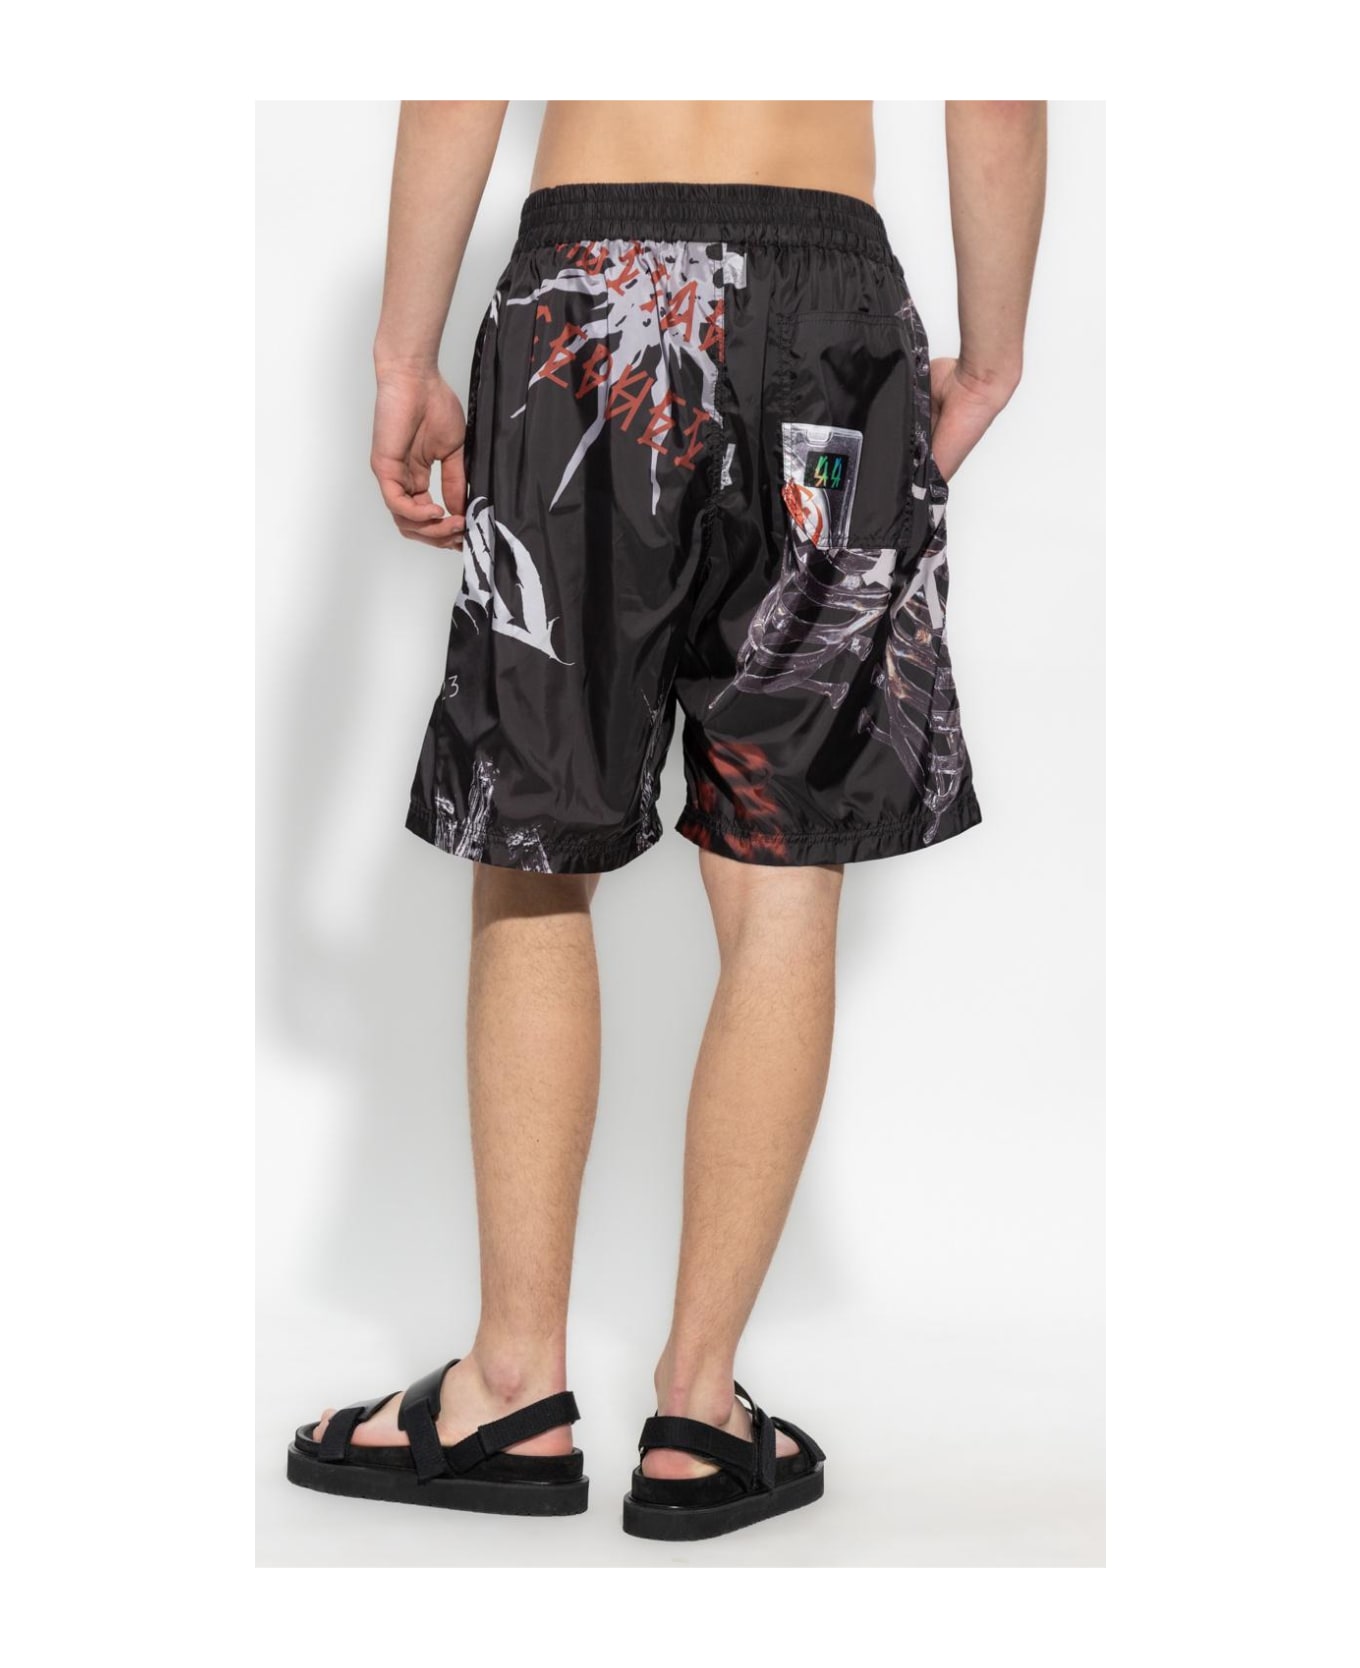 44 Label Group Patterned Shorts